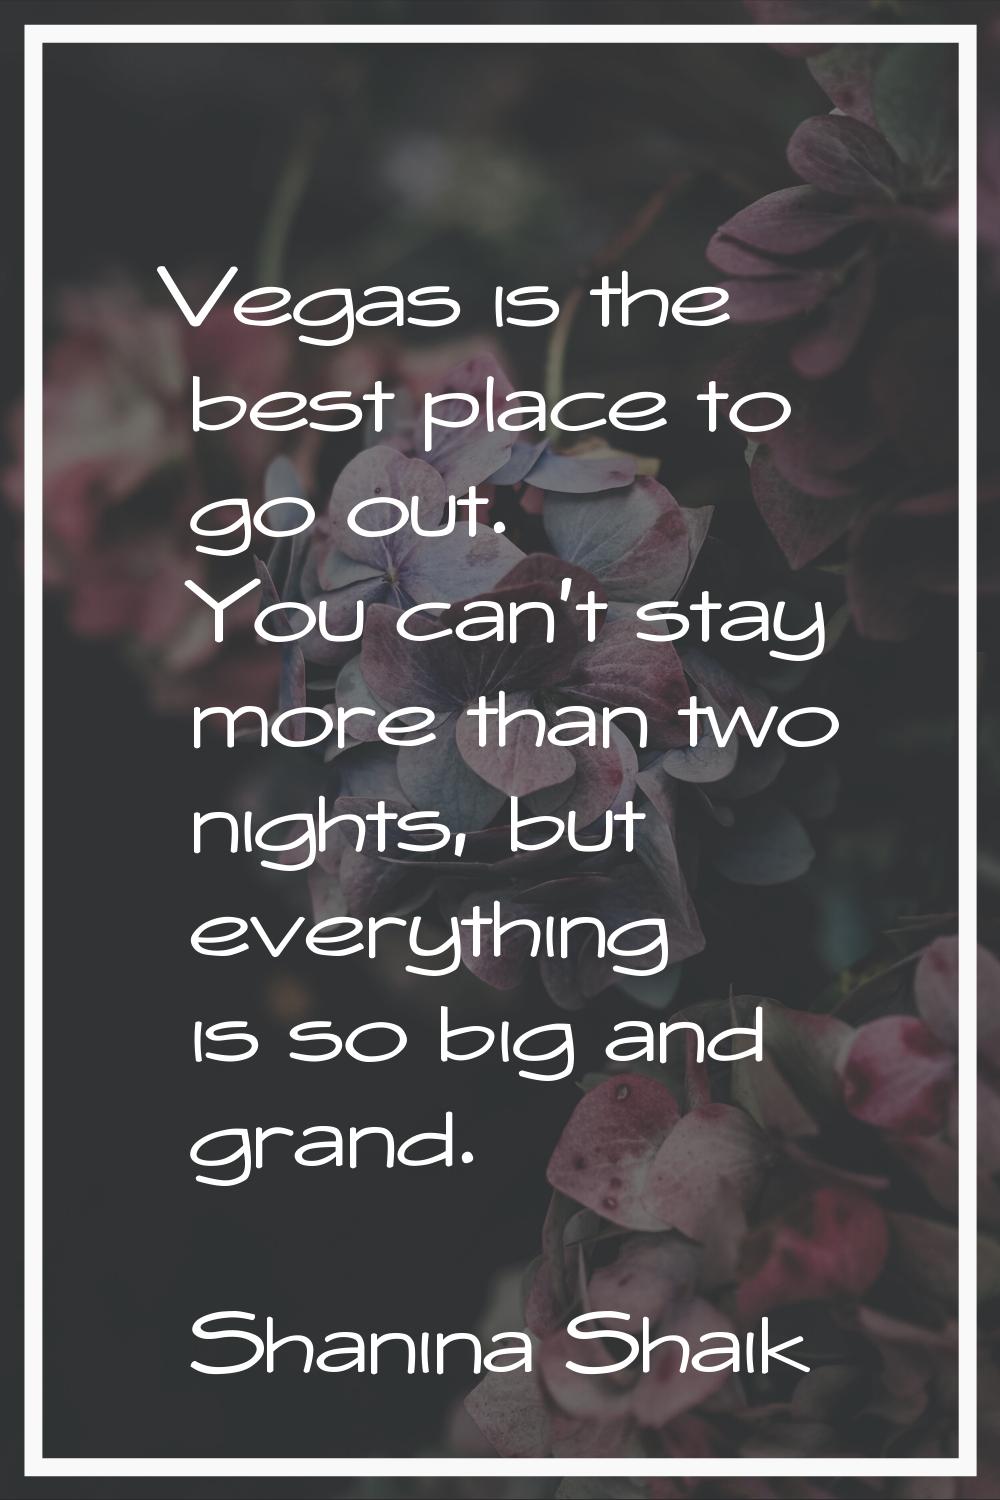 Vegas is the best place to go out. You can't stay more than two nights, but everything is so big an